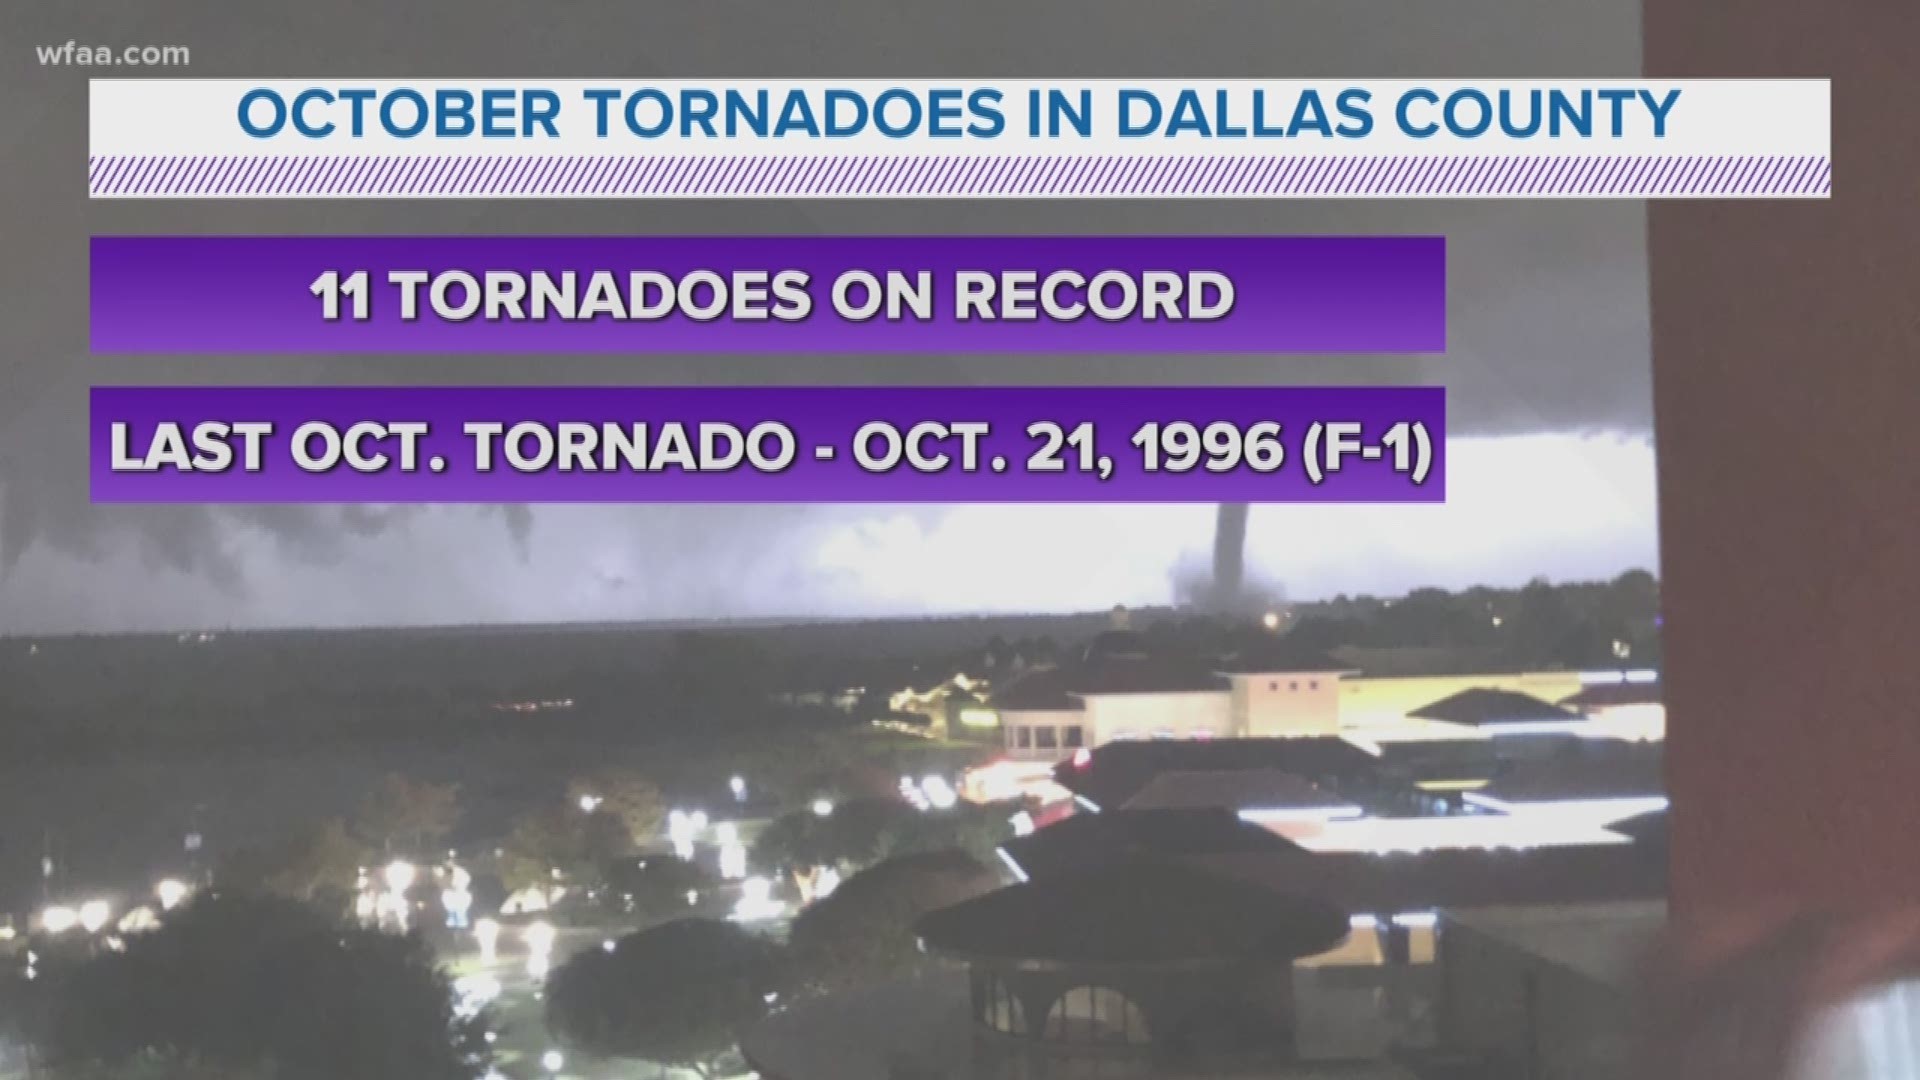 While tornadoes in North Texas typically peak during the Spring months, there does tend to be another spike in tornado activity in October.